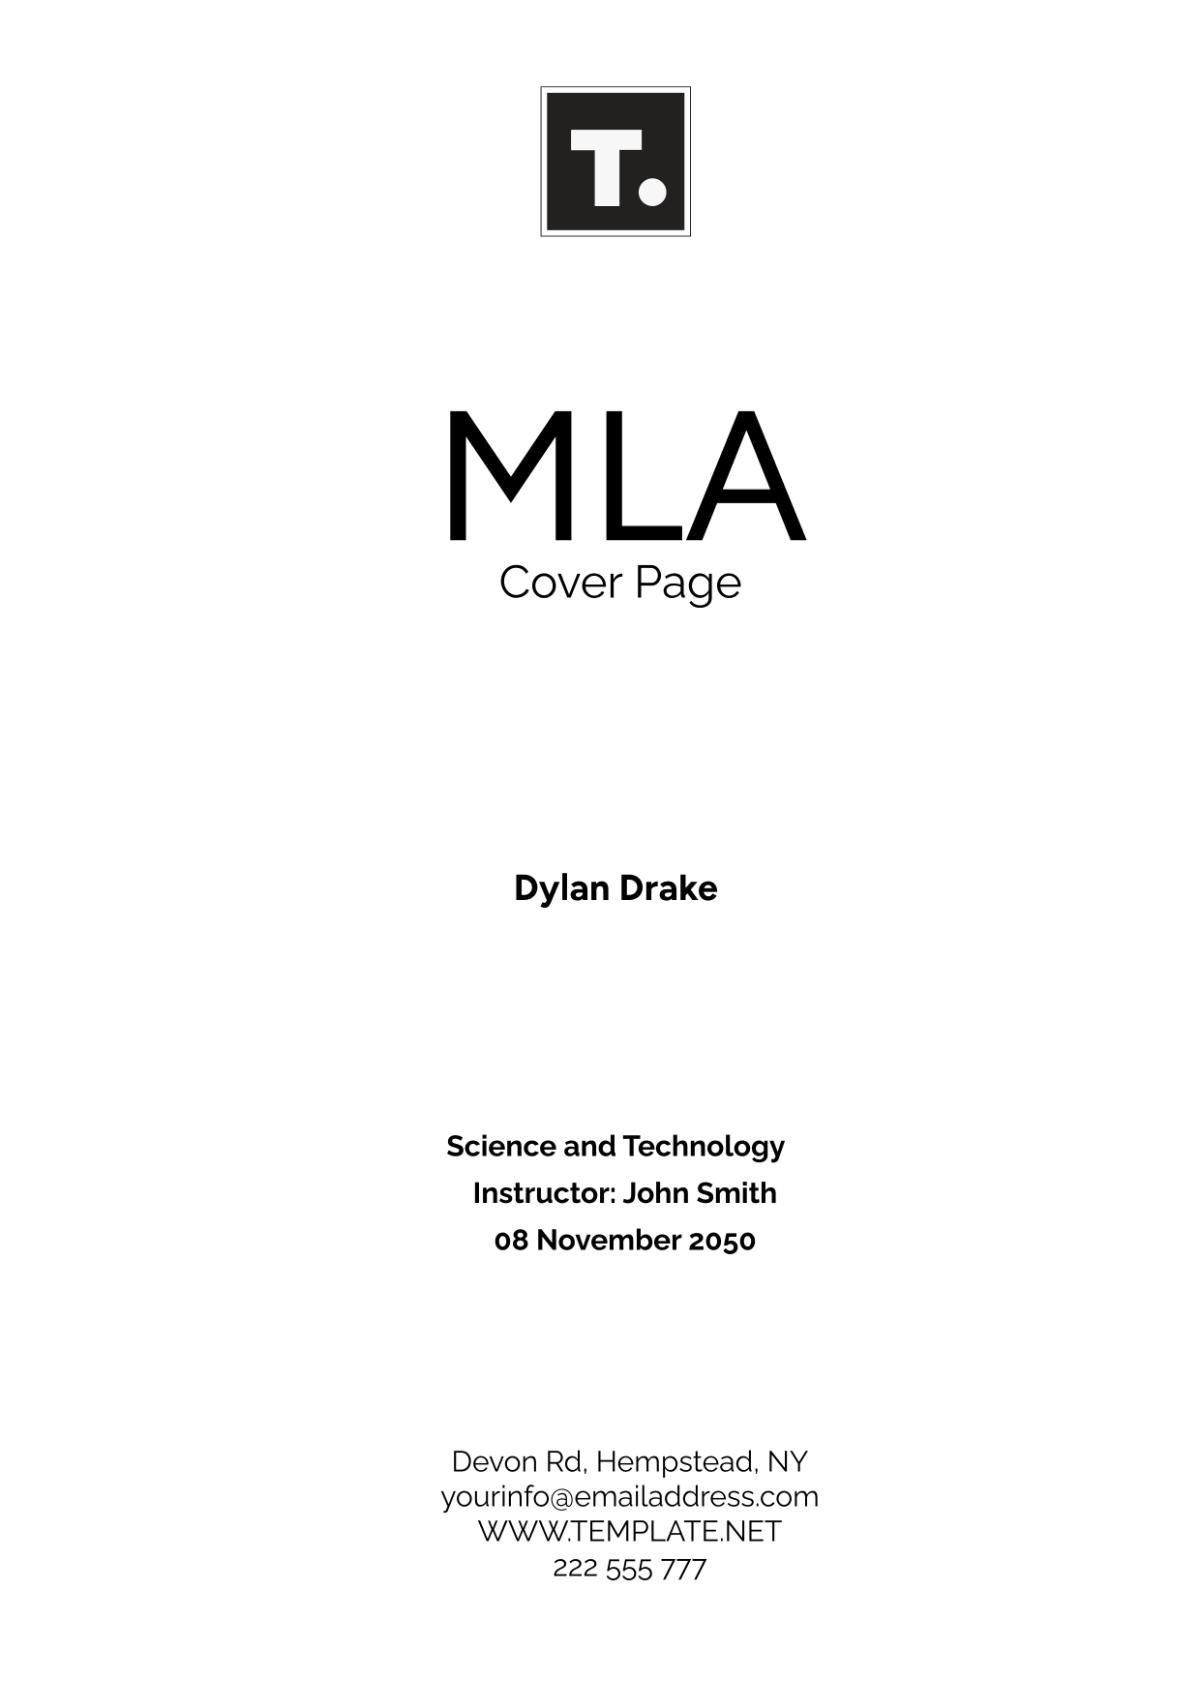 MLA Cover Page